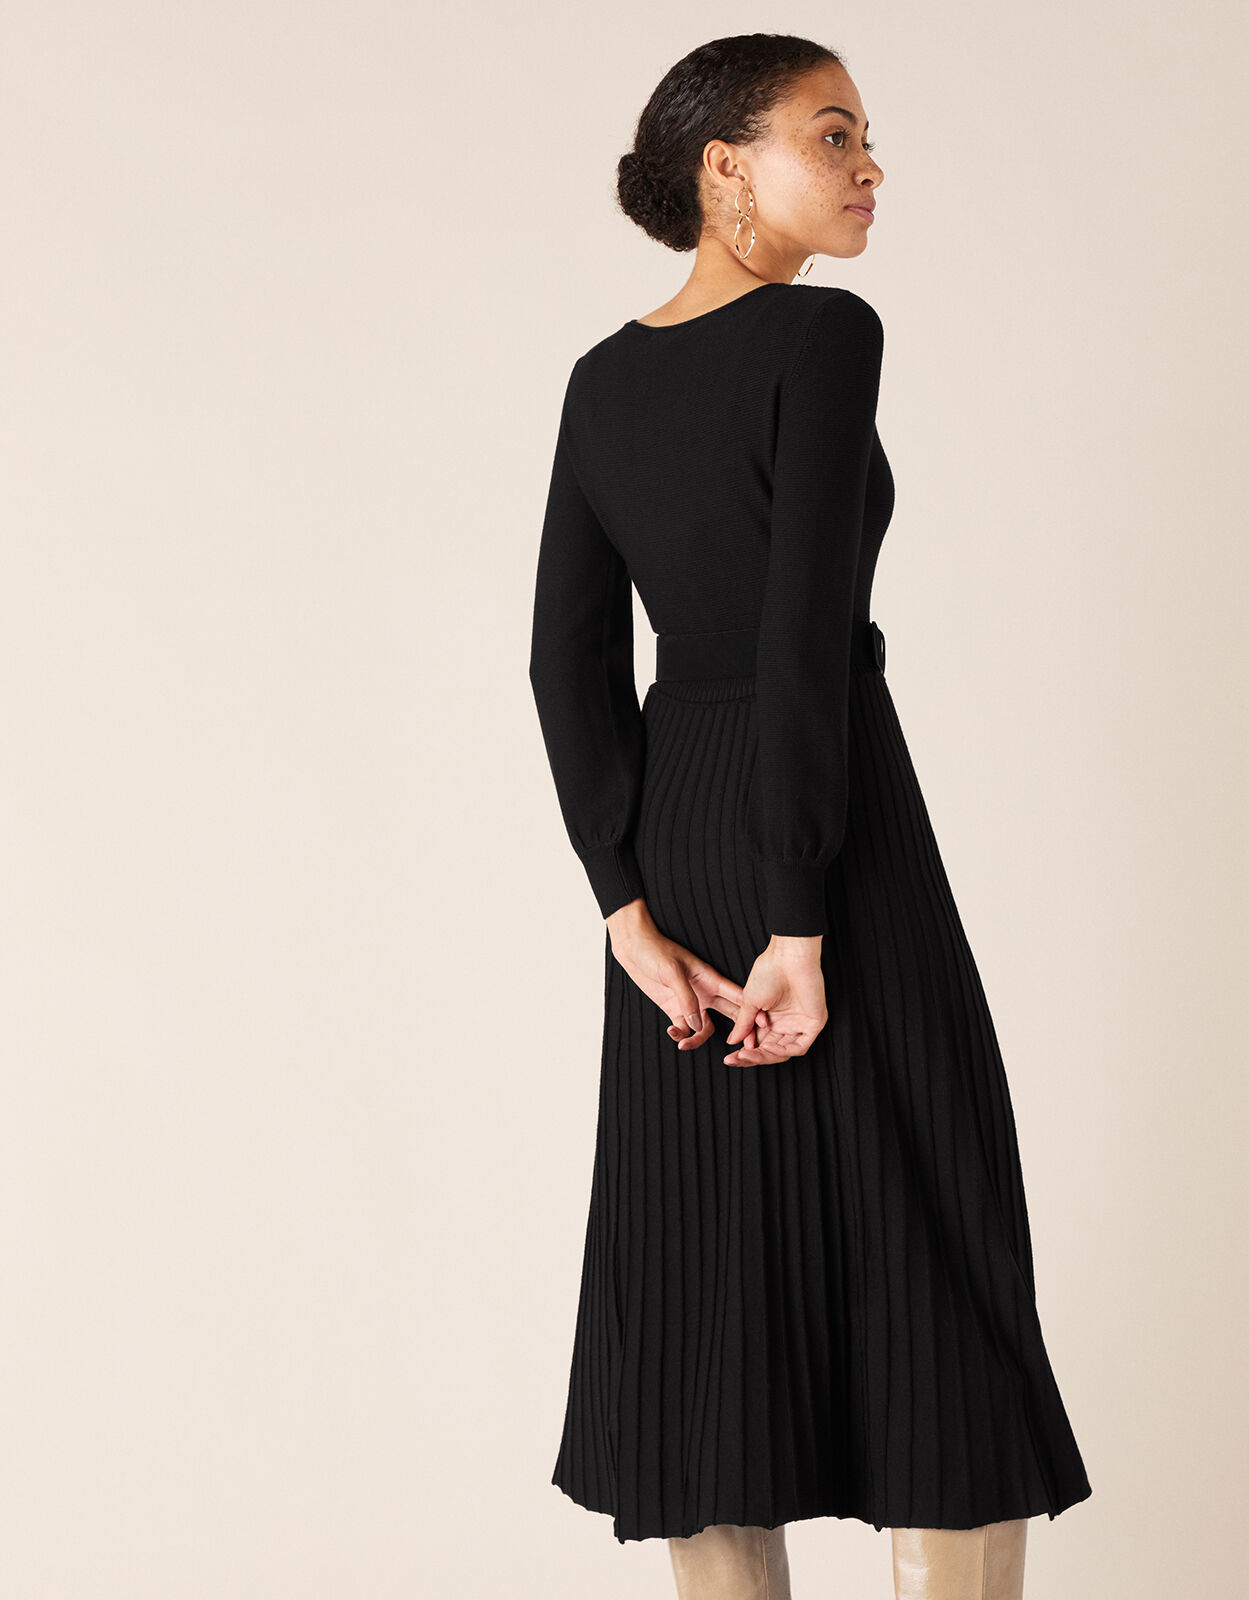 Pleated Skirt Knit Dress with LENZING ...